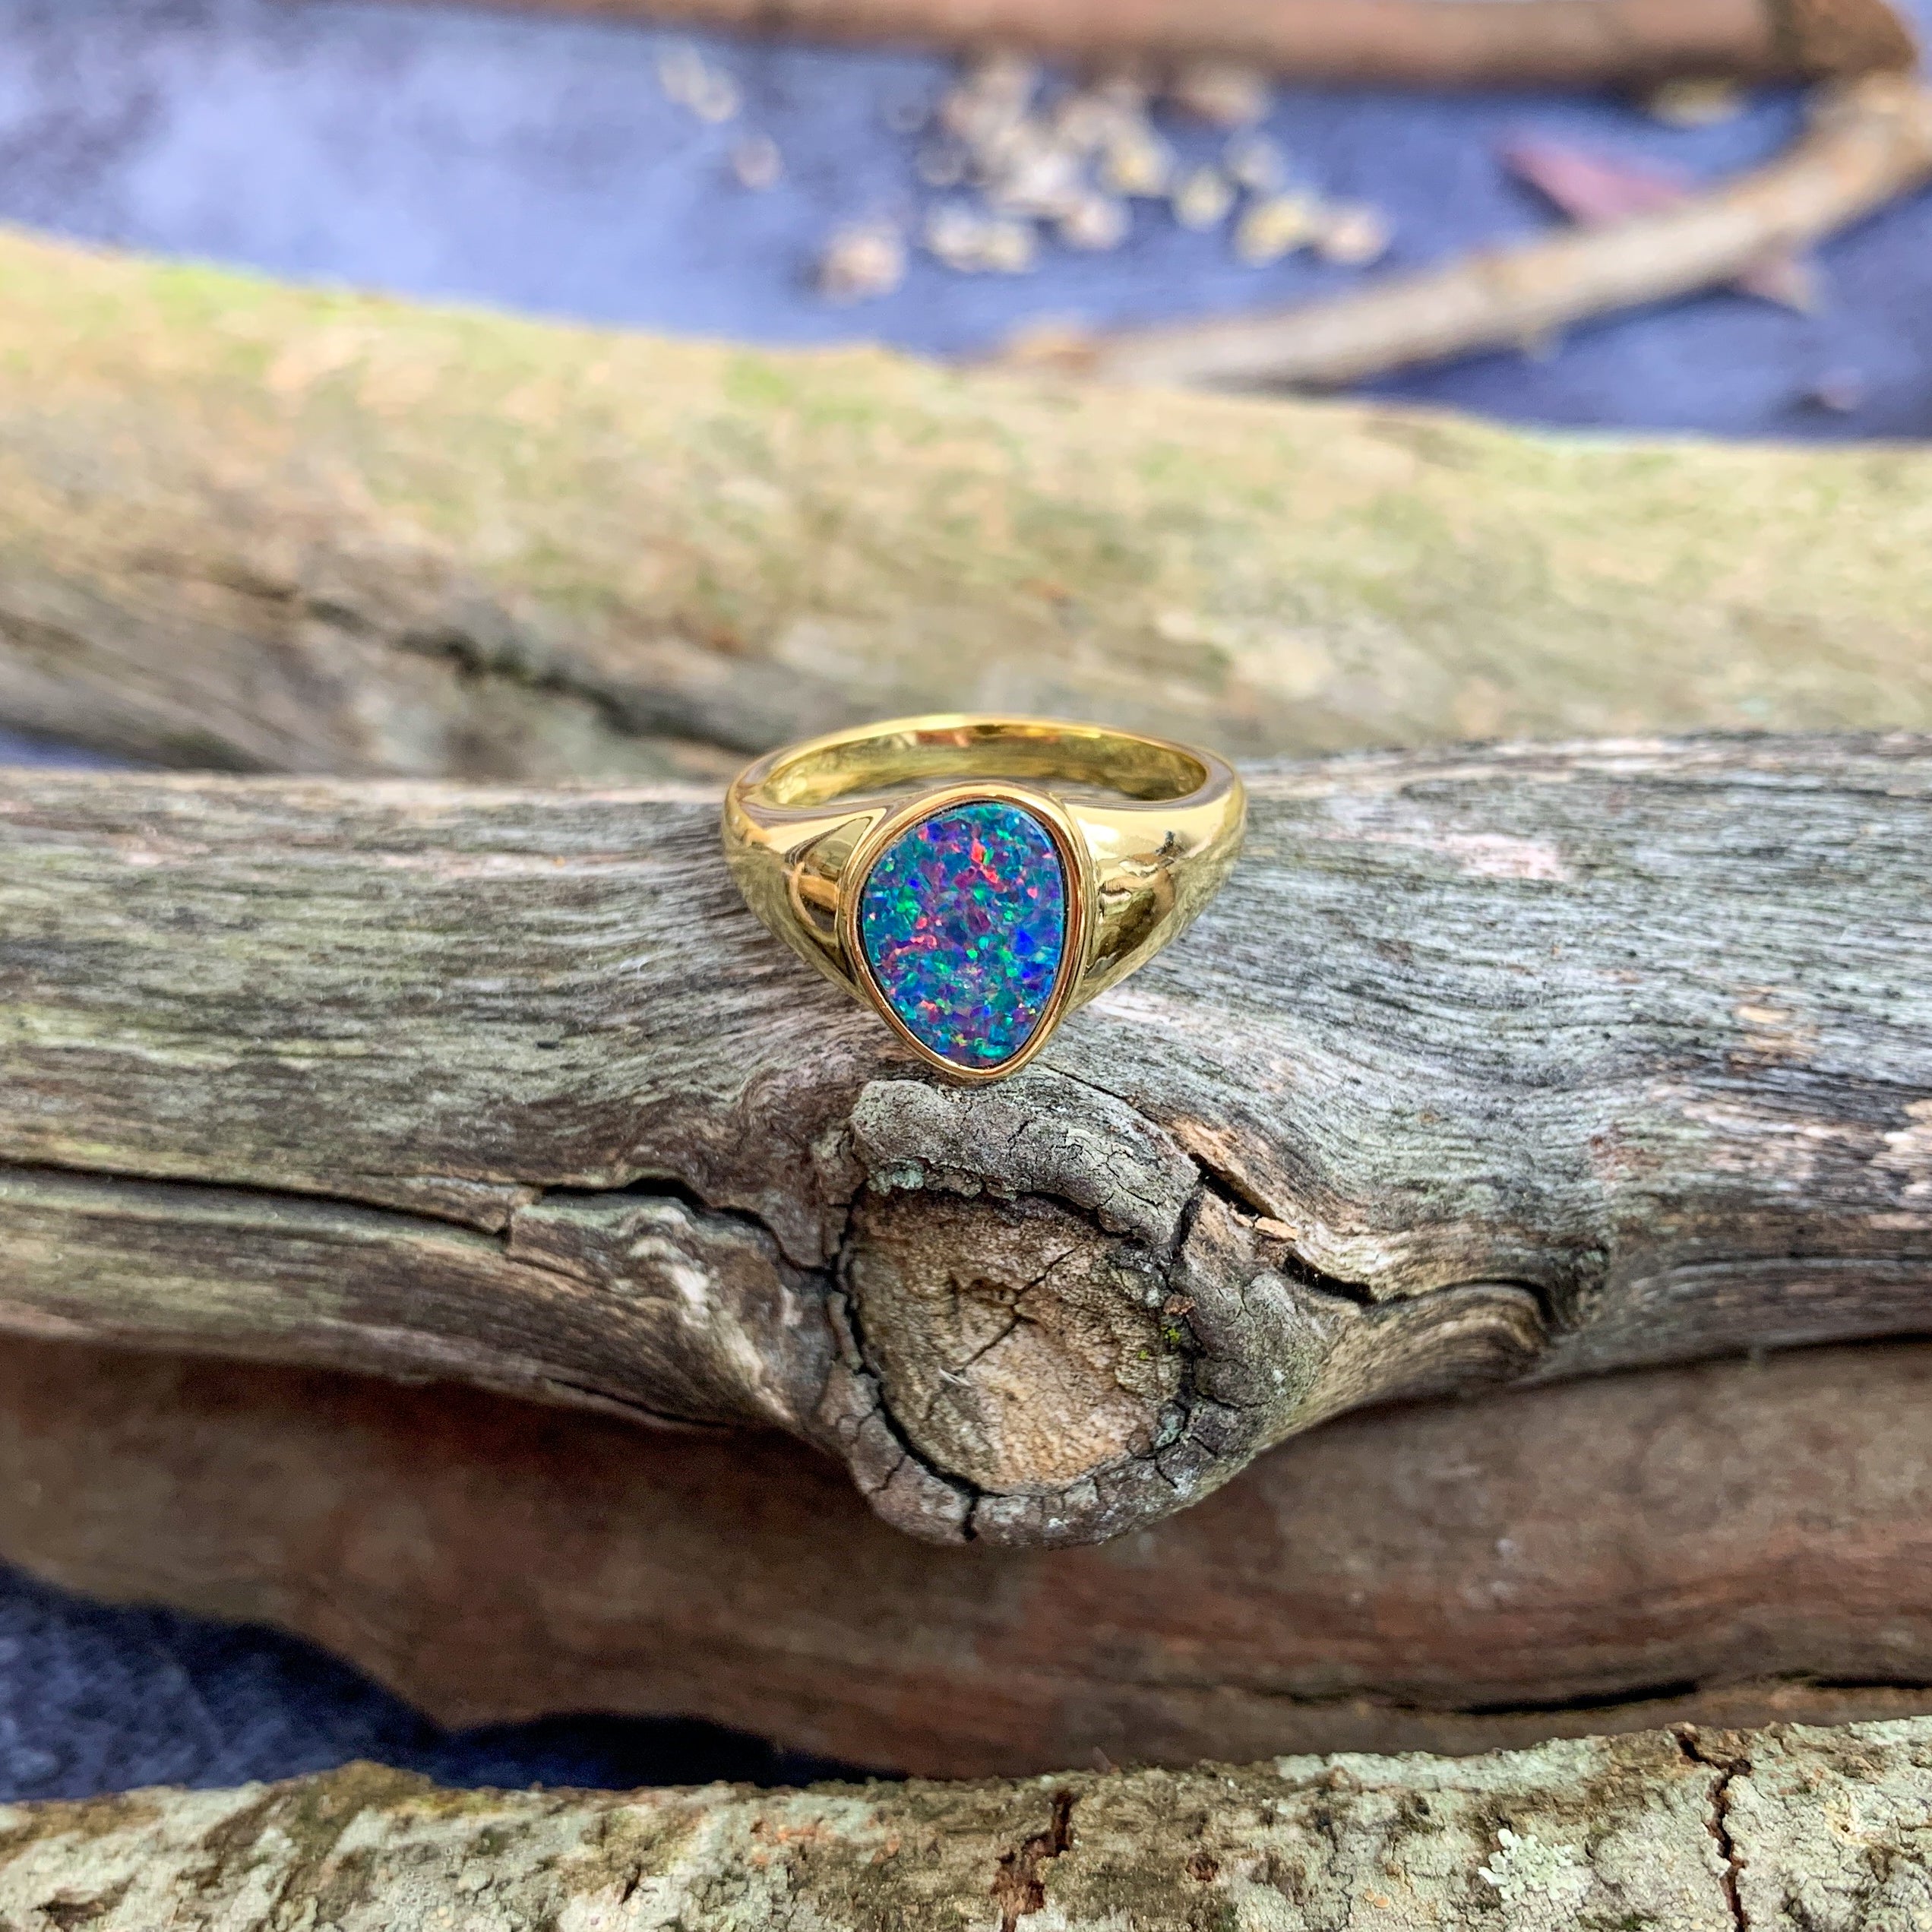 Gold Plated Silver solitaire band Opal doublet ring - Masterpiece Jewellery Opal & Gems Sydney Australia | Online Shop